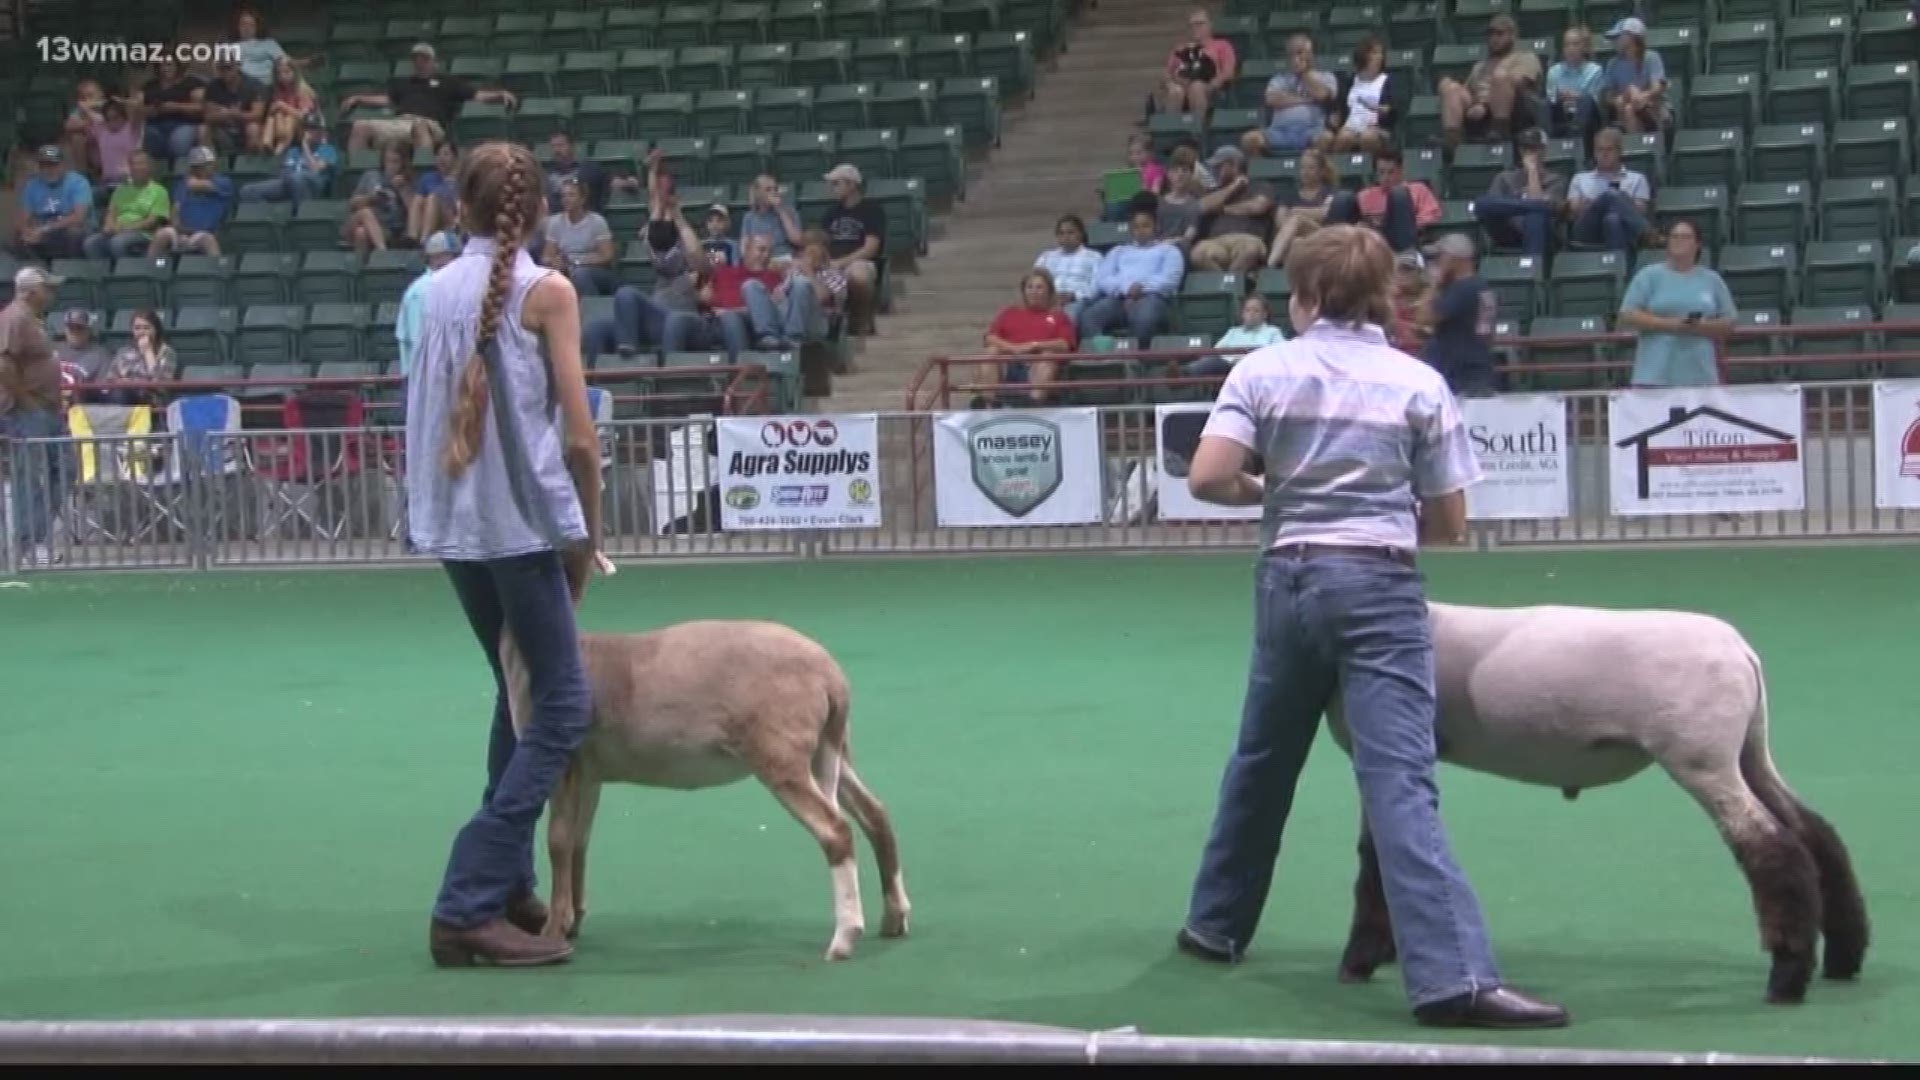 Sheep steal the show at Georgia National Fairgrounds